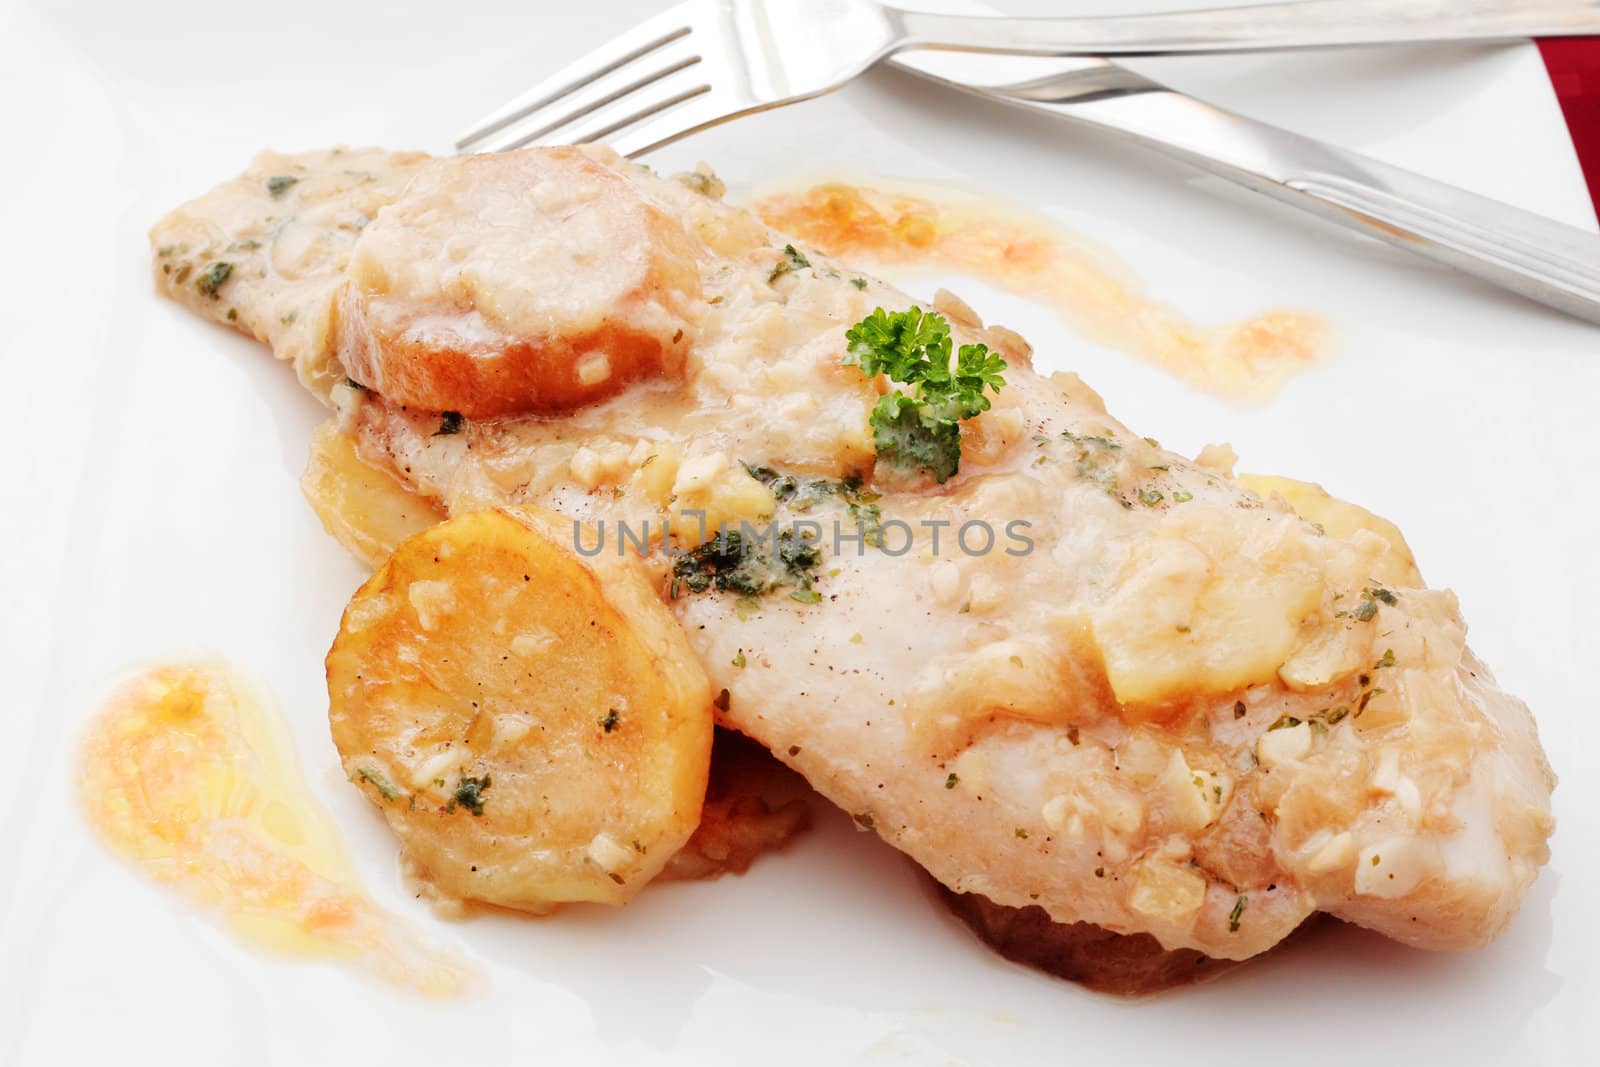 dish of hake cooked with sauce made with garlic onion parsley islet olive oil and white wine